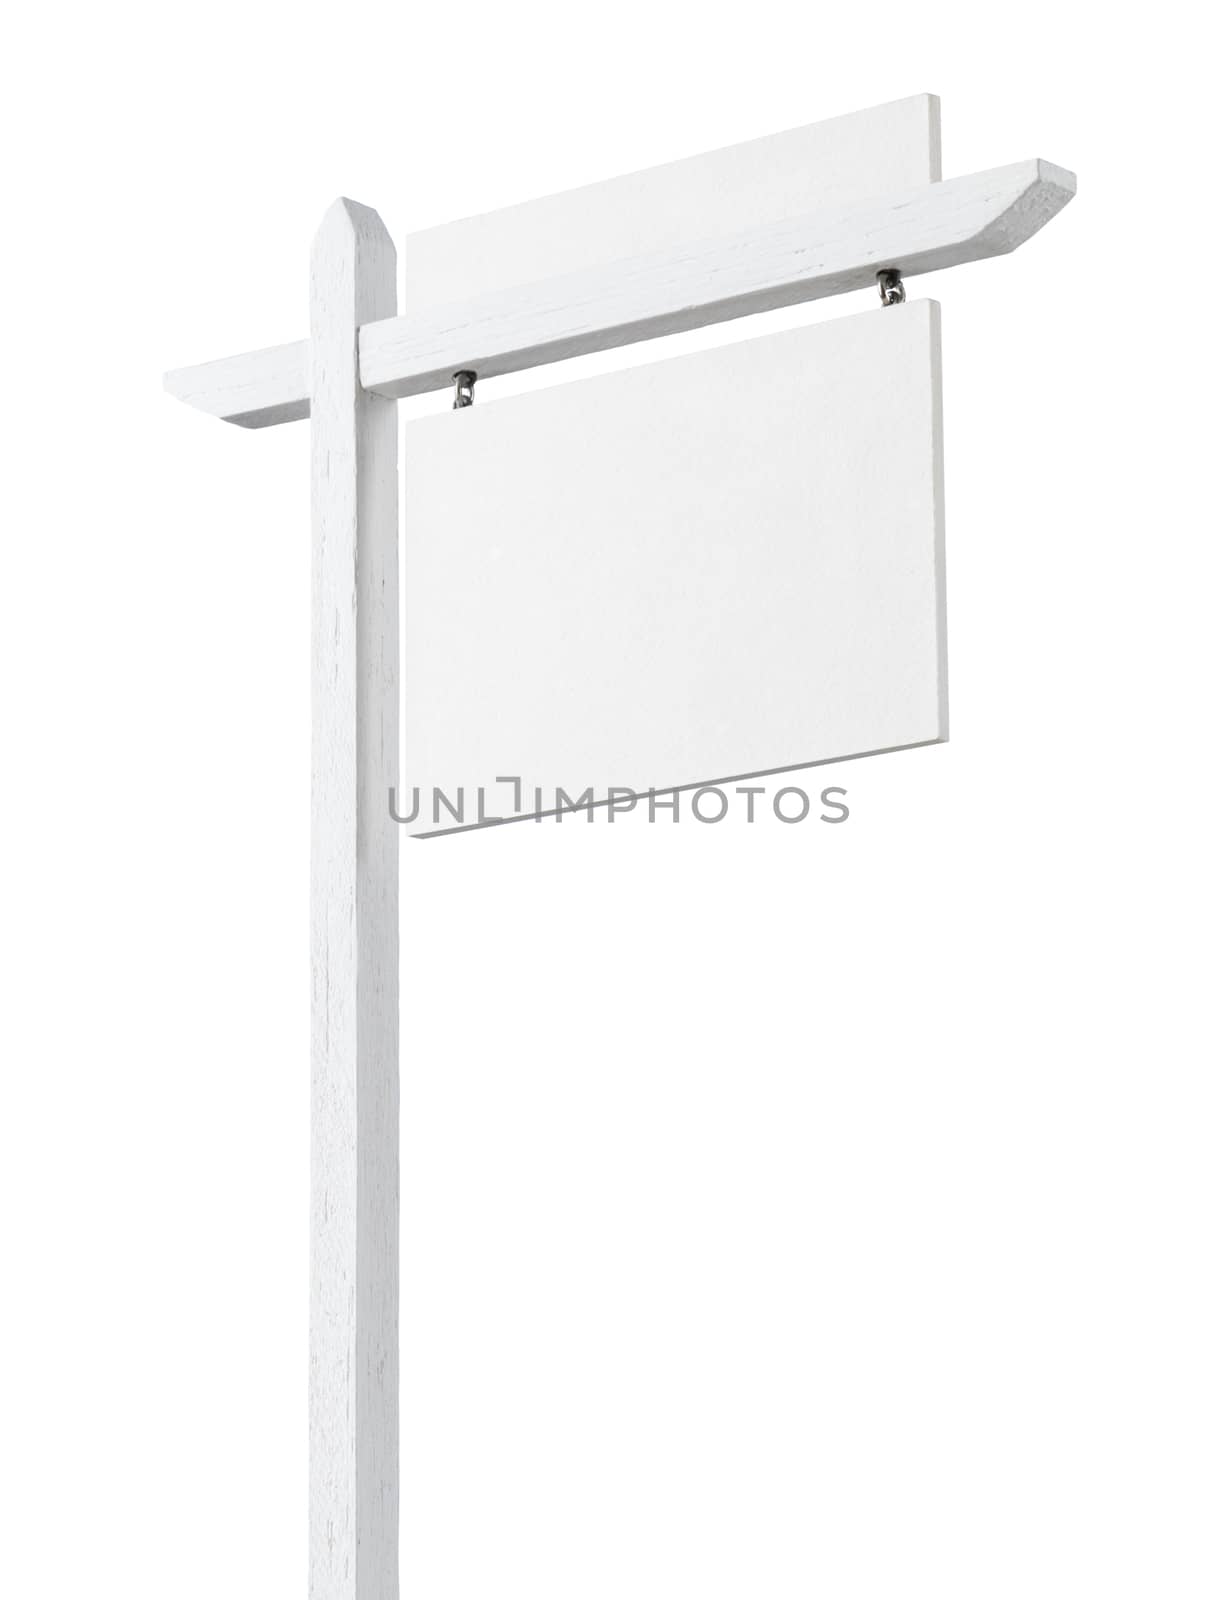 Blank Real Estate Sign with Upper Placard Ready For Your Own Text.